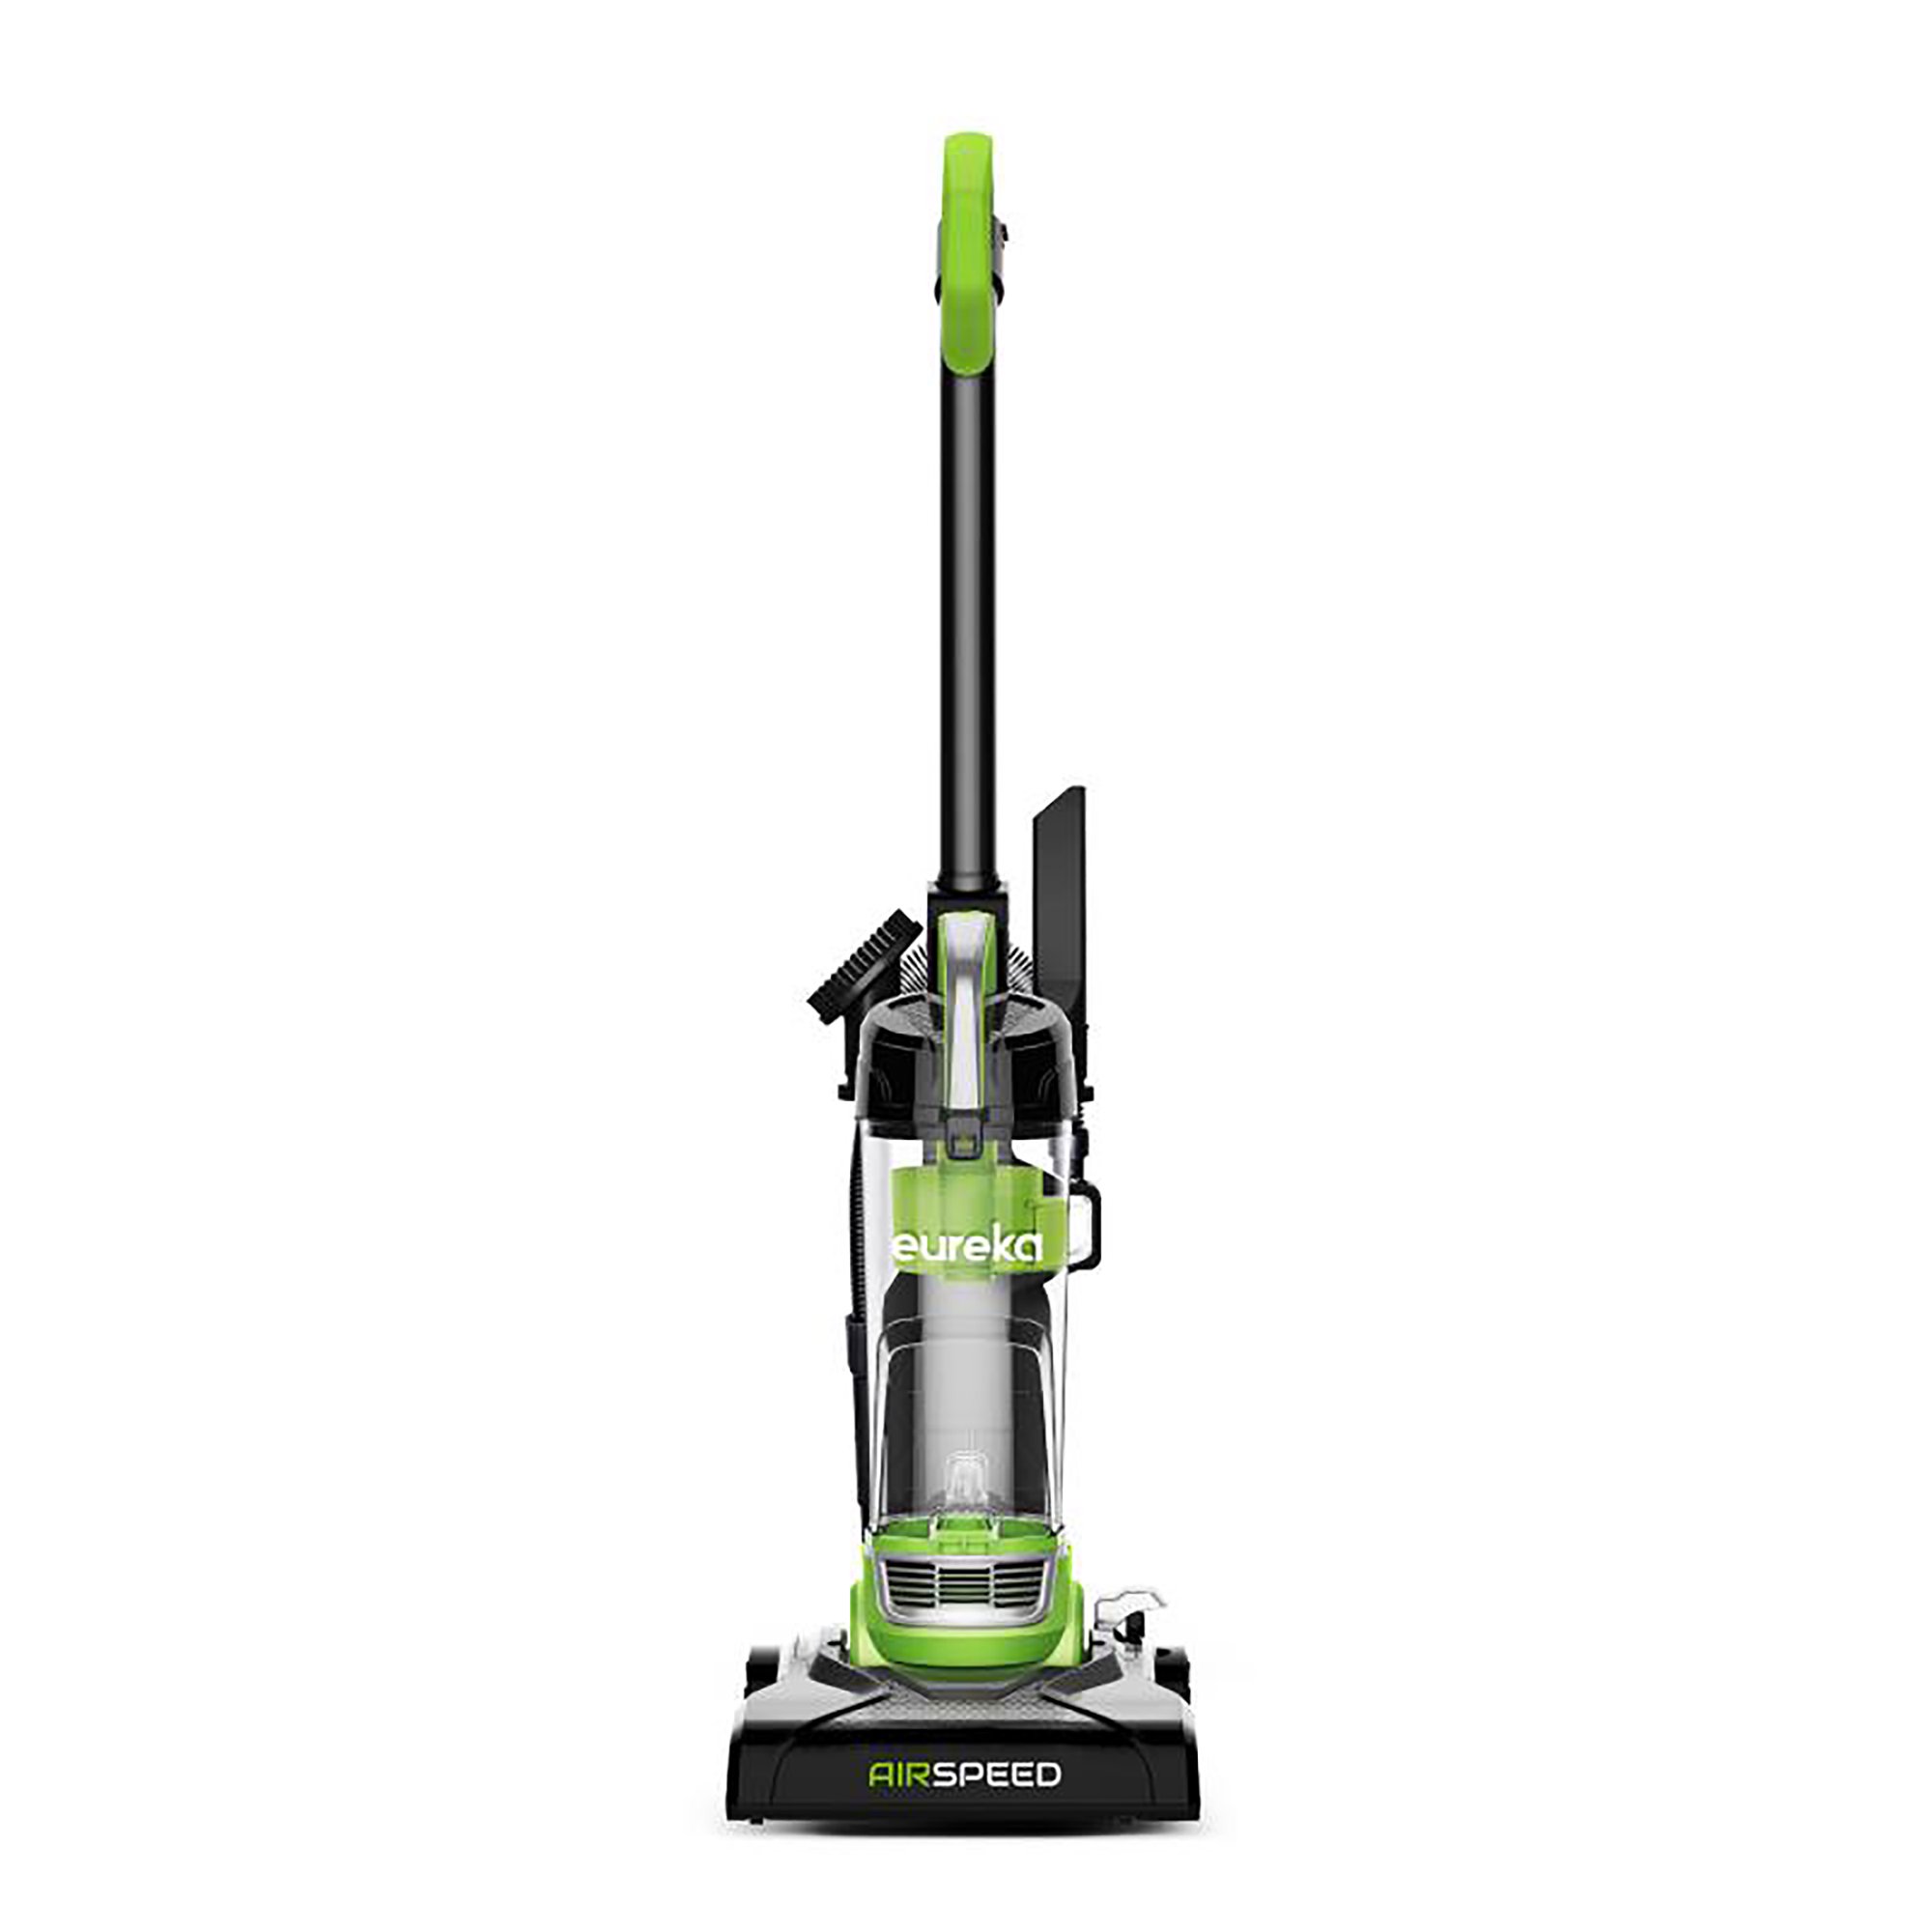 Eureka AirSpeed Lightweight Multi-Surface Bagless Upright Vacuum Cleaner $40 + Free Shipping